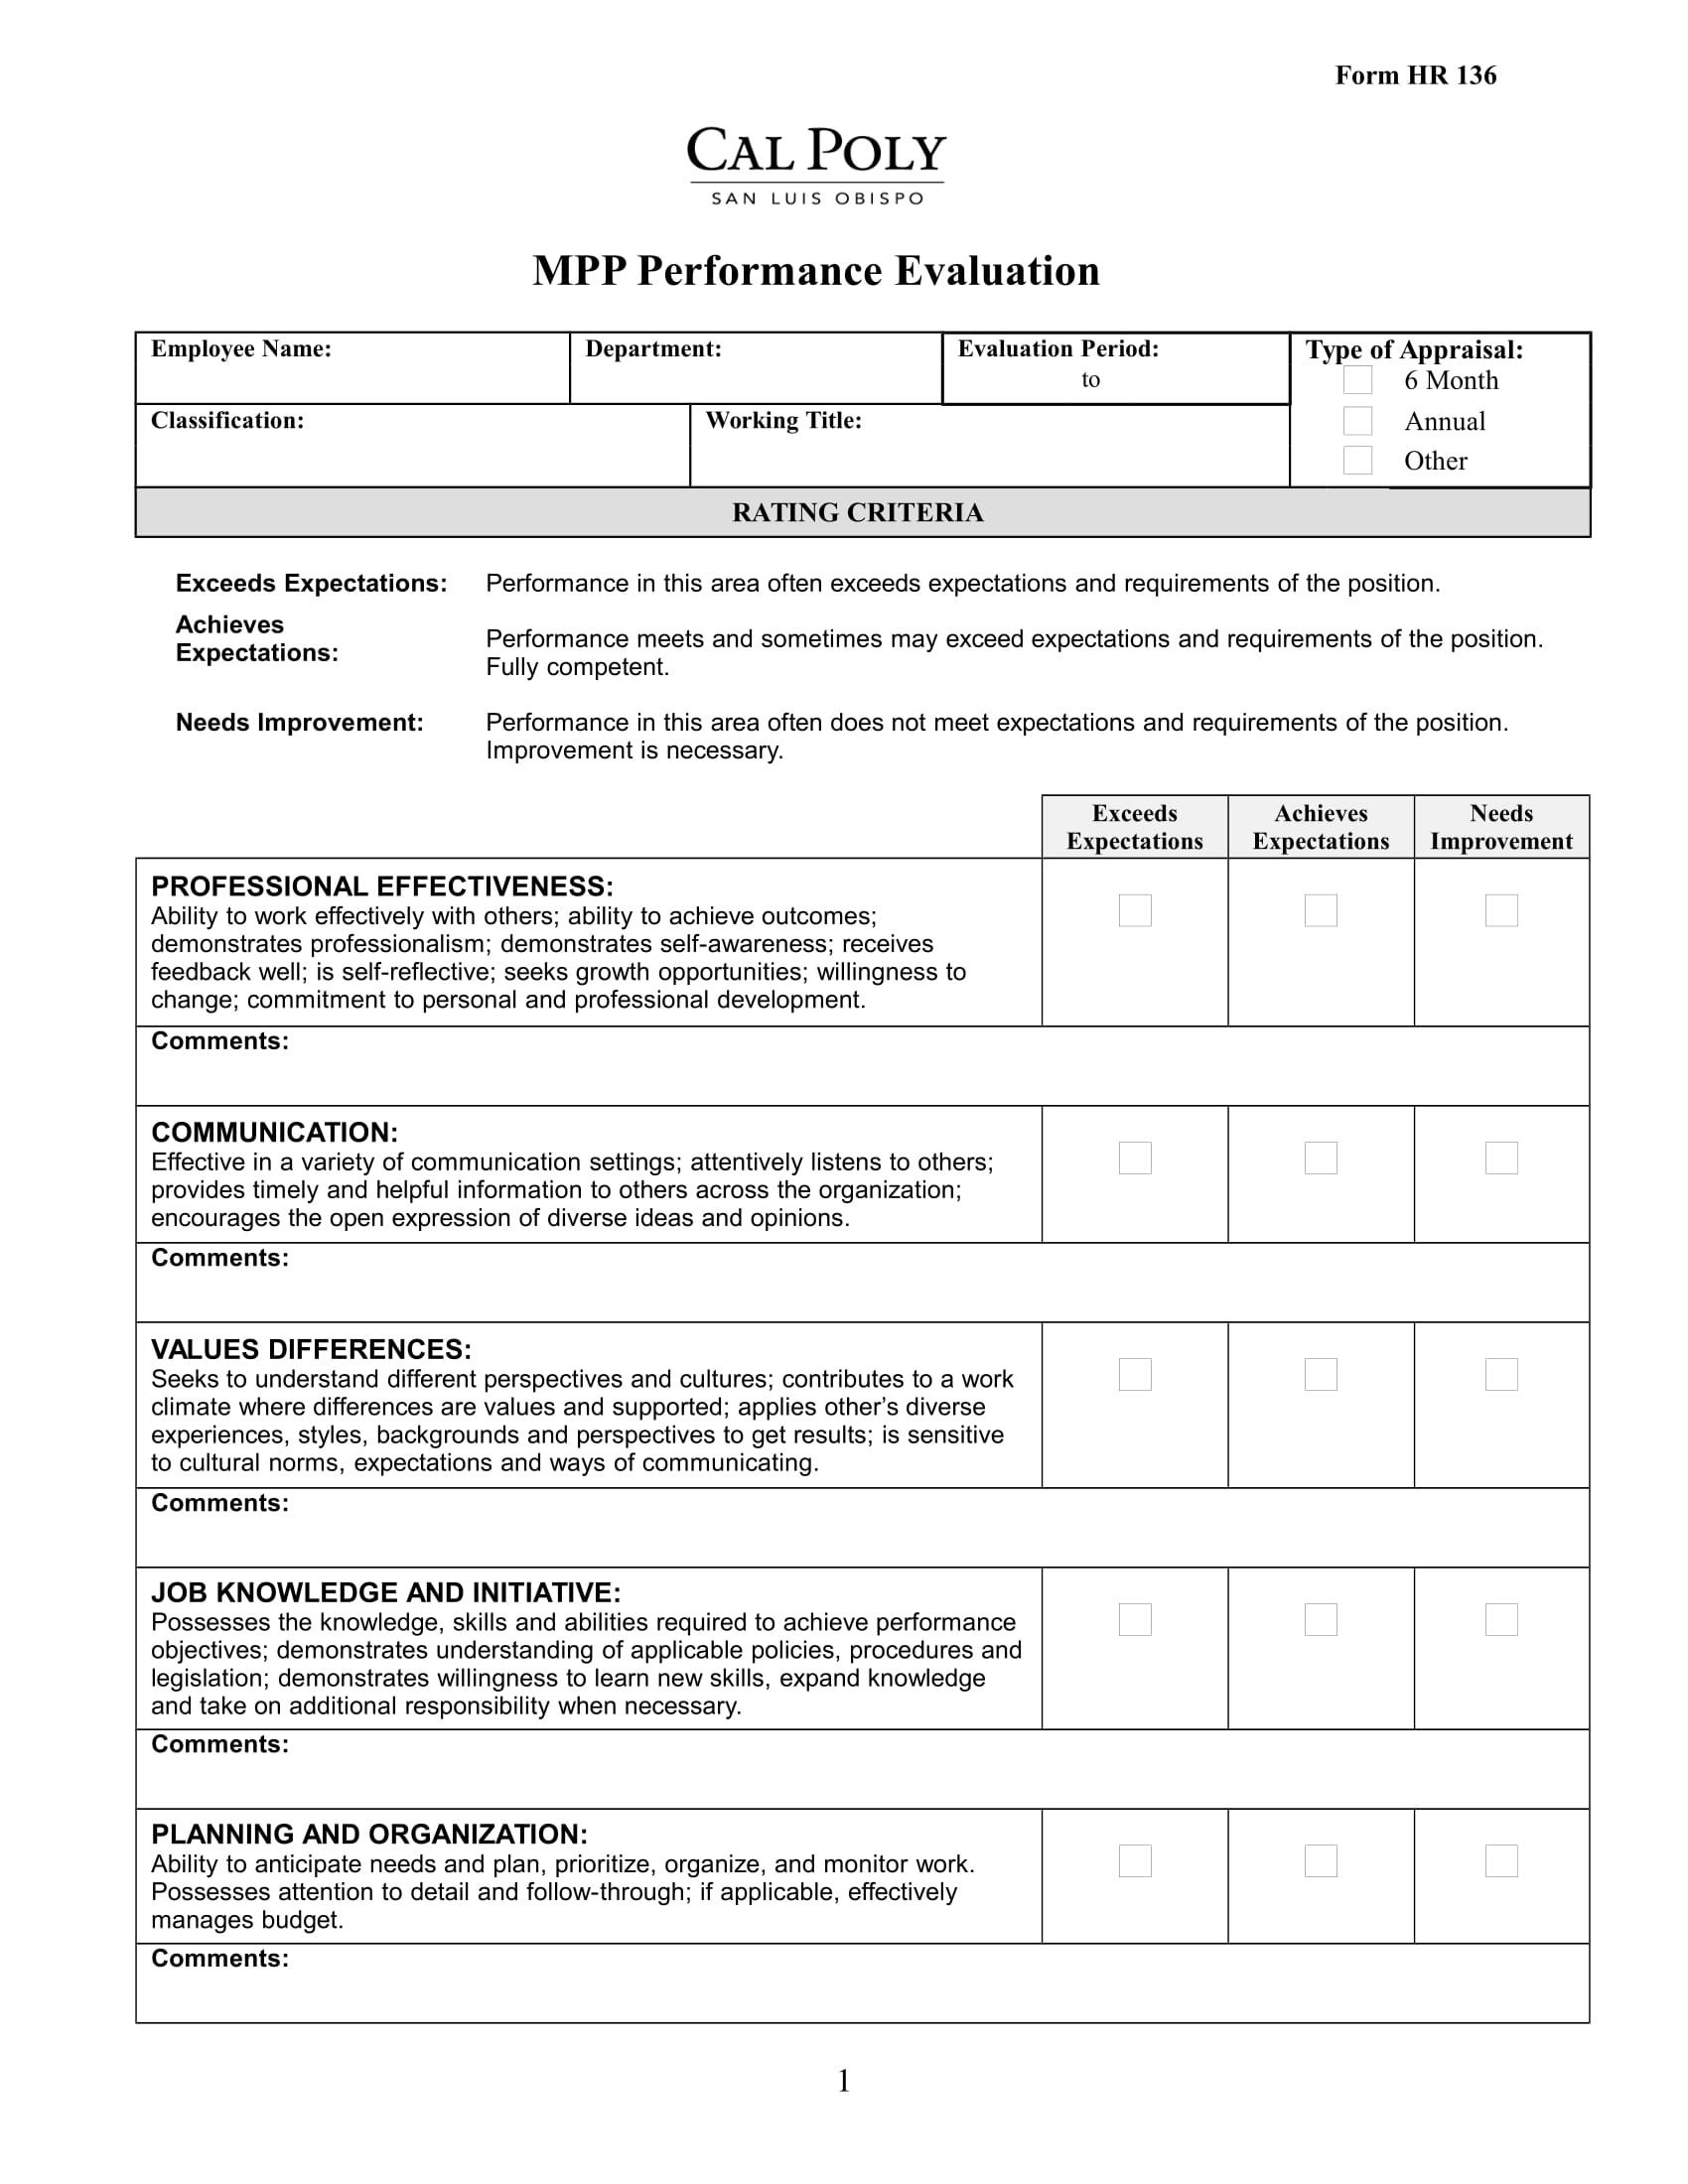 employee-evaluation-of-manager-form-employee-evaluation-form